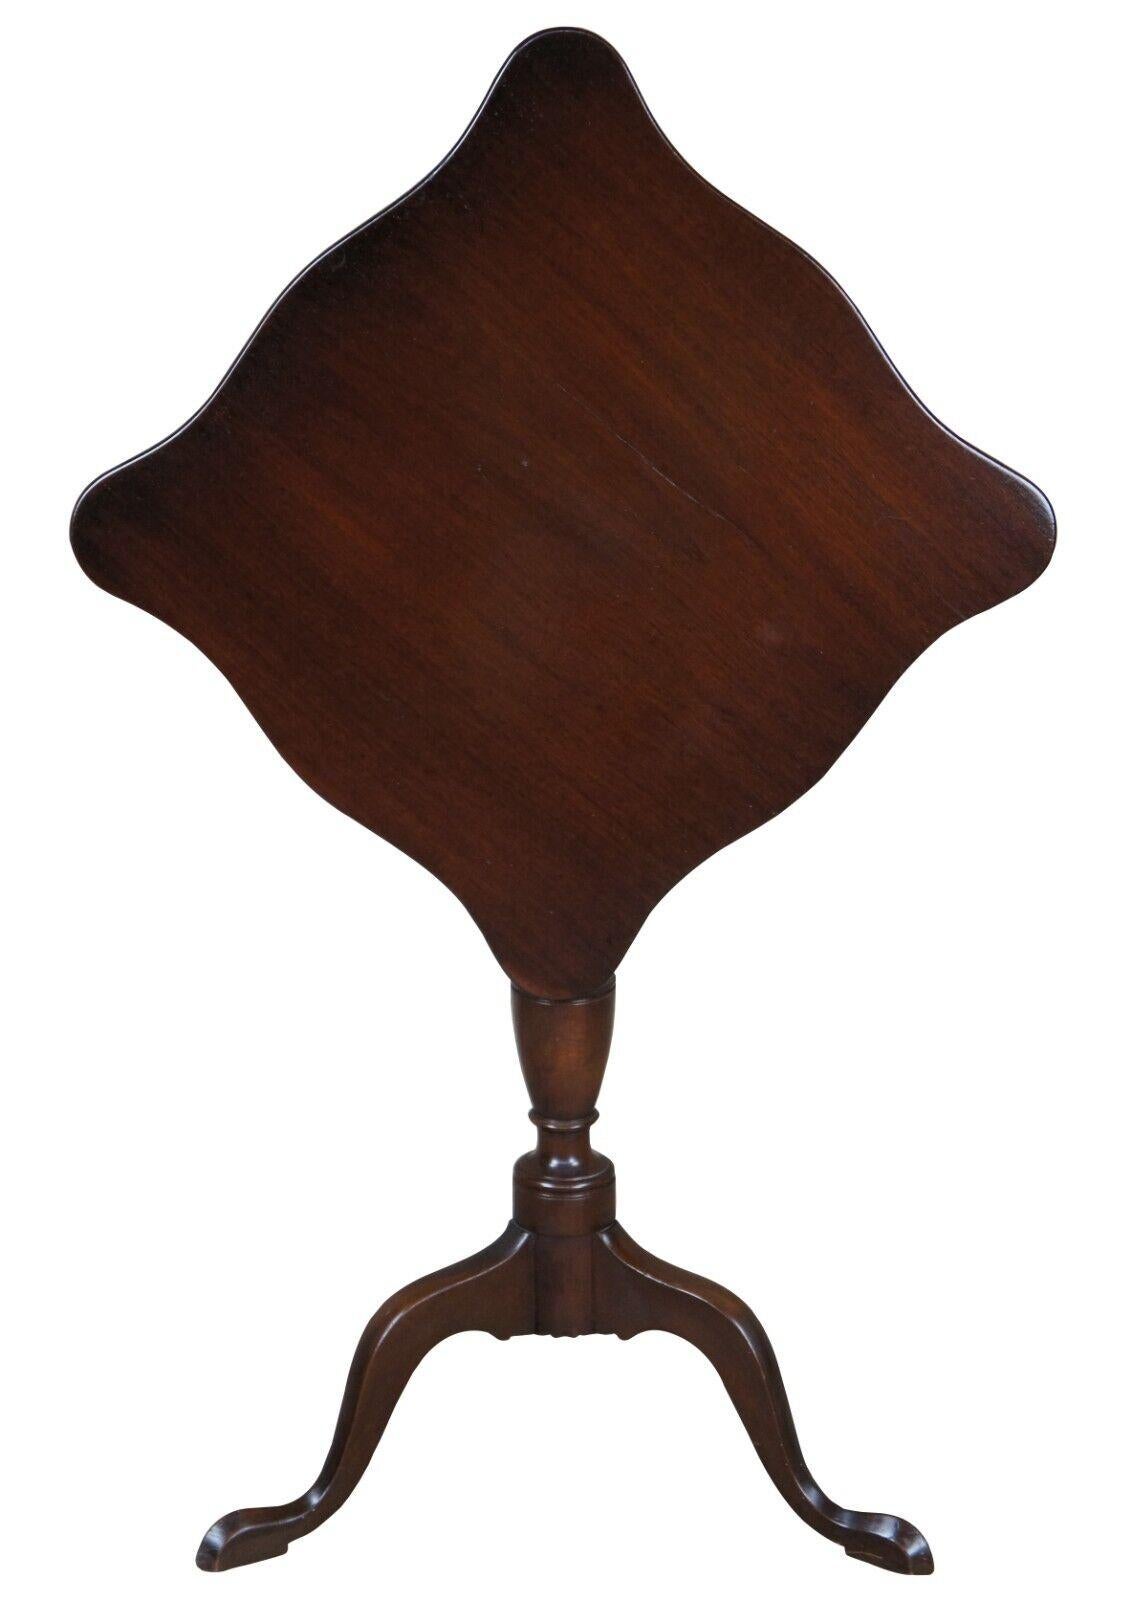 American 2 Kittinger Colonial Williamsburg Federal Mahogany Tilt Top Tables Candle Stands For Sale